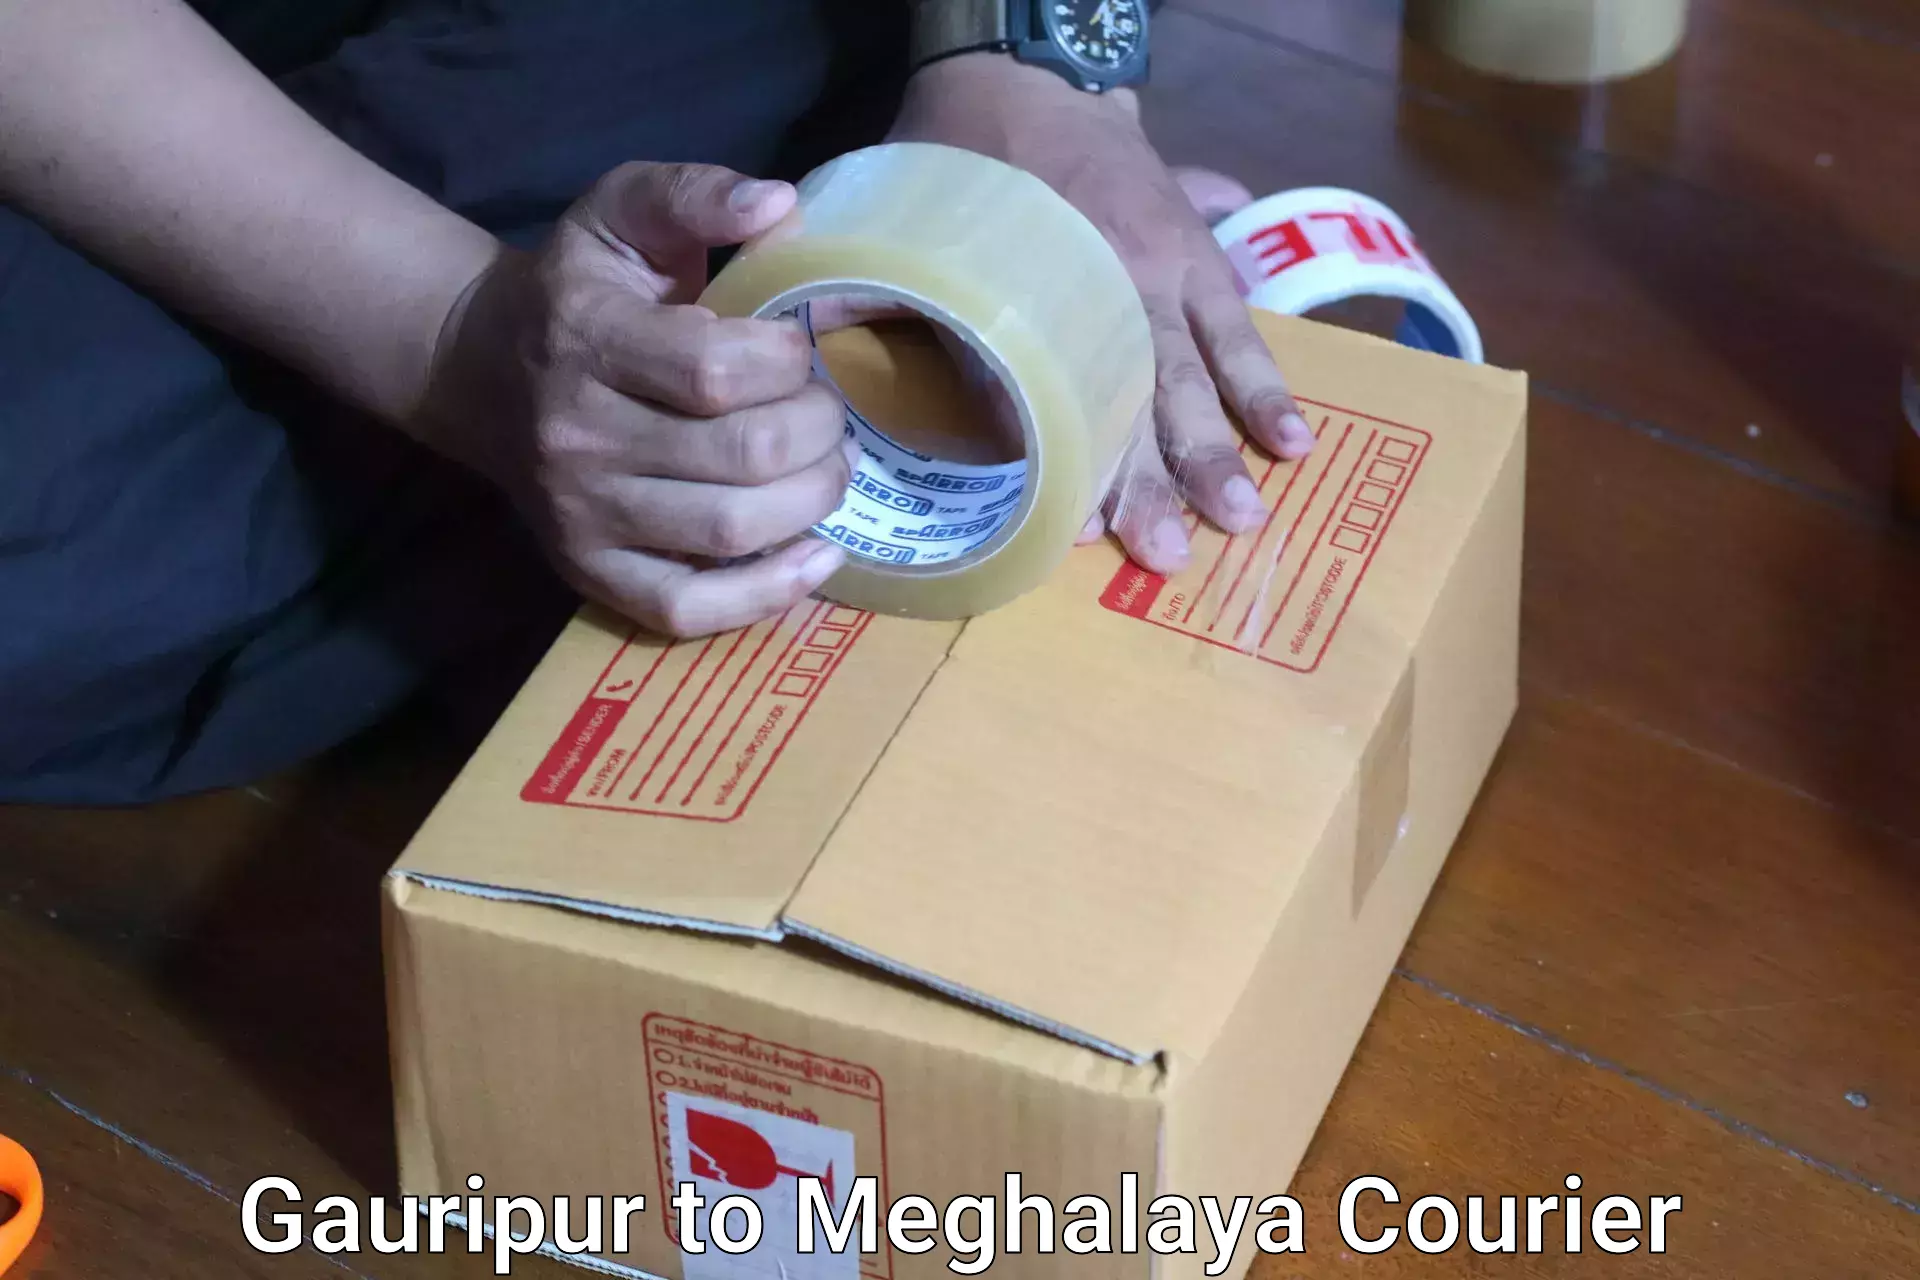 Luggage shipping specialists Gauripur to Meghalaya